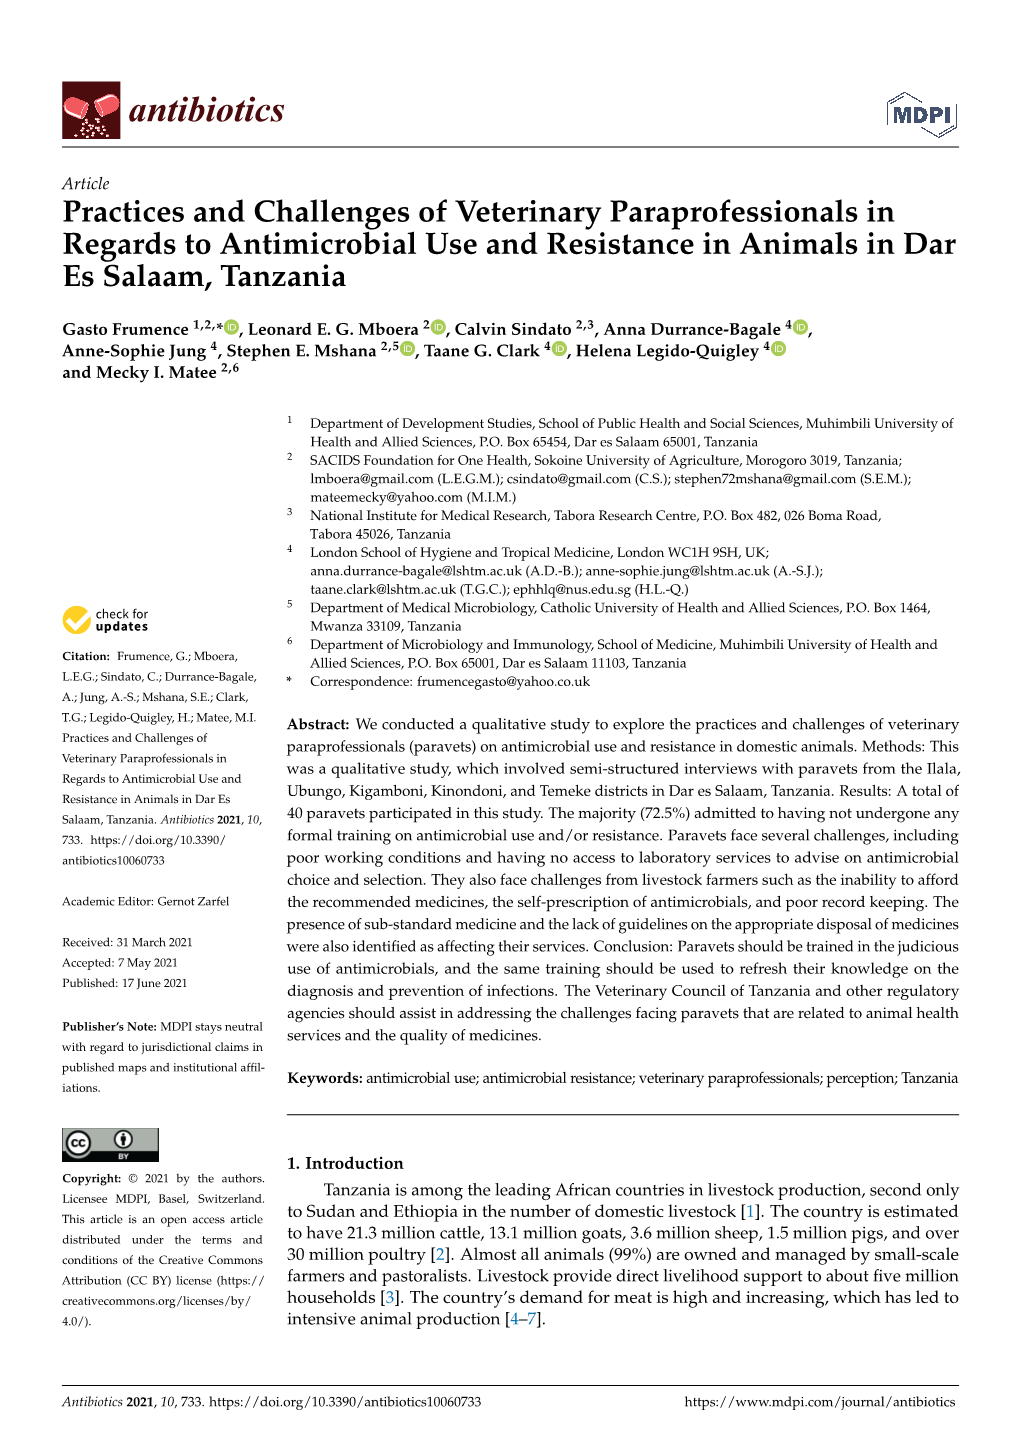 Practices and Challenges of Veterinary Paraprofessionals in Regards to Antimicrobial Use and Resistance in Animals in Dar Es Salaam, Tanzania